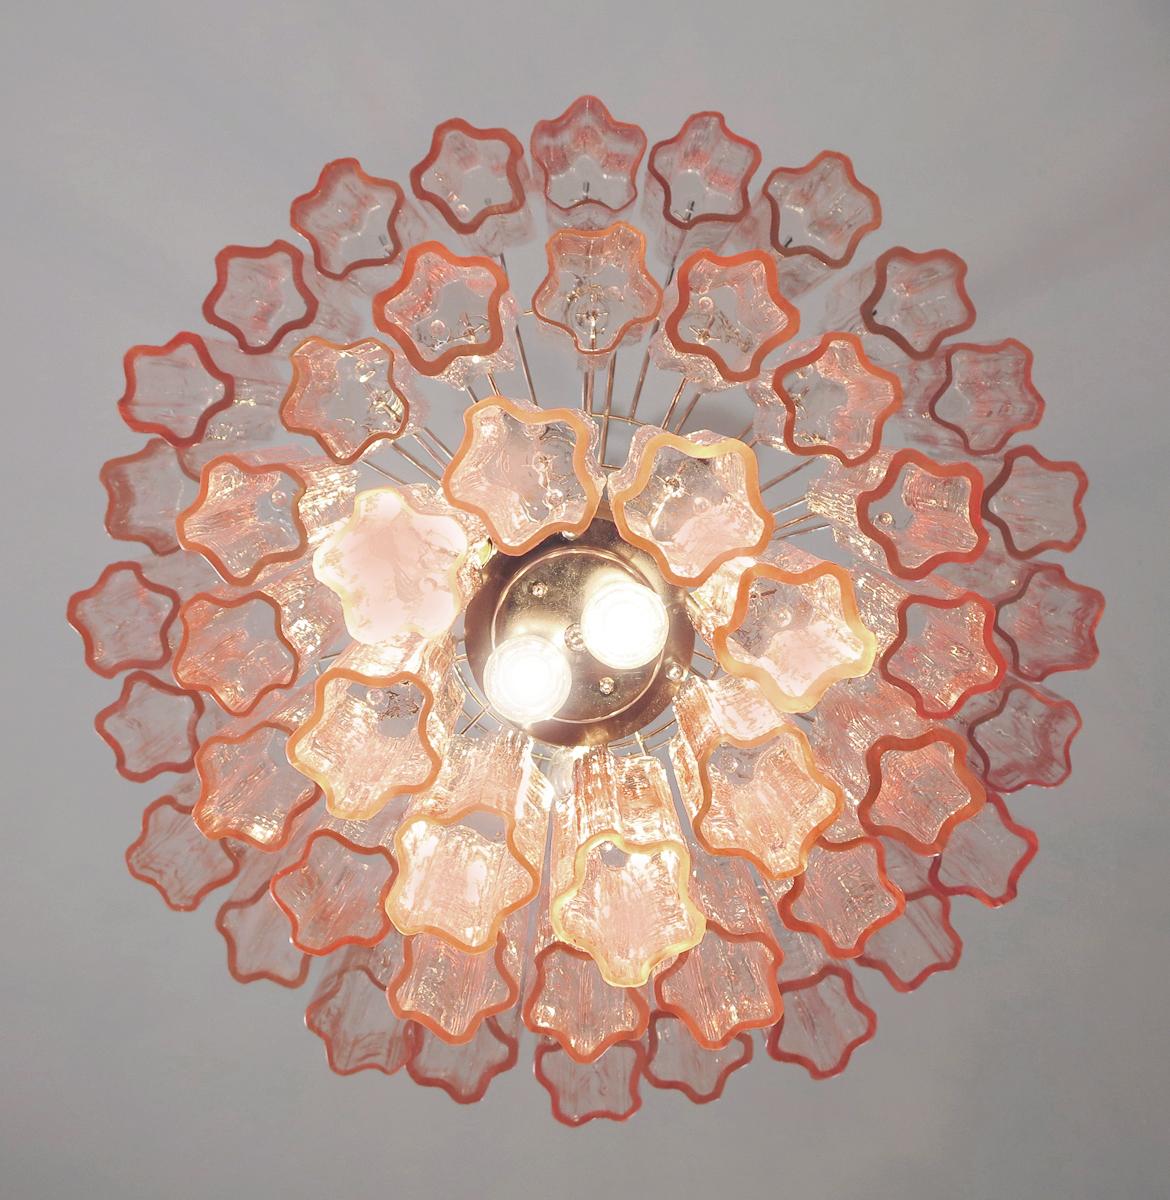 Pair of Tronchi Chandeliers, 48 Pink Glasses, Murano, 1990 For Sale 8